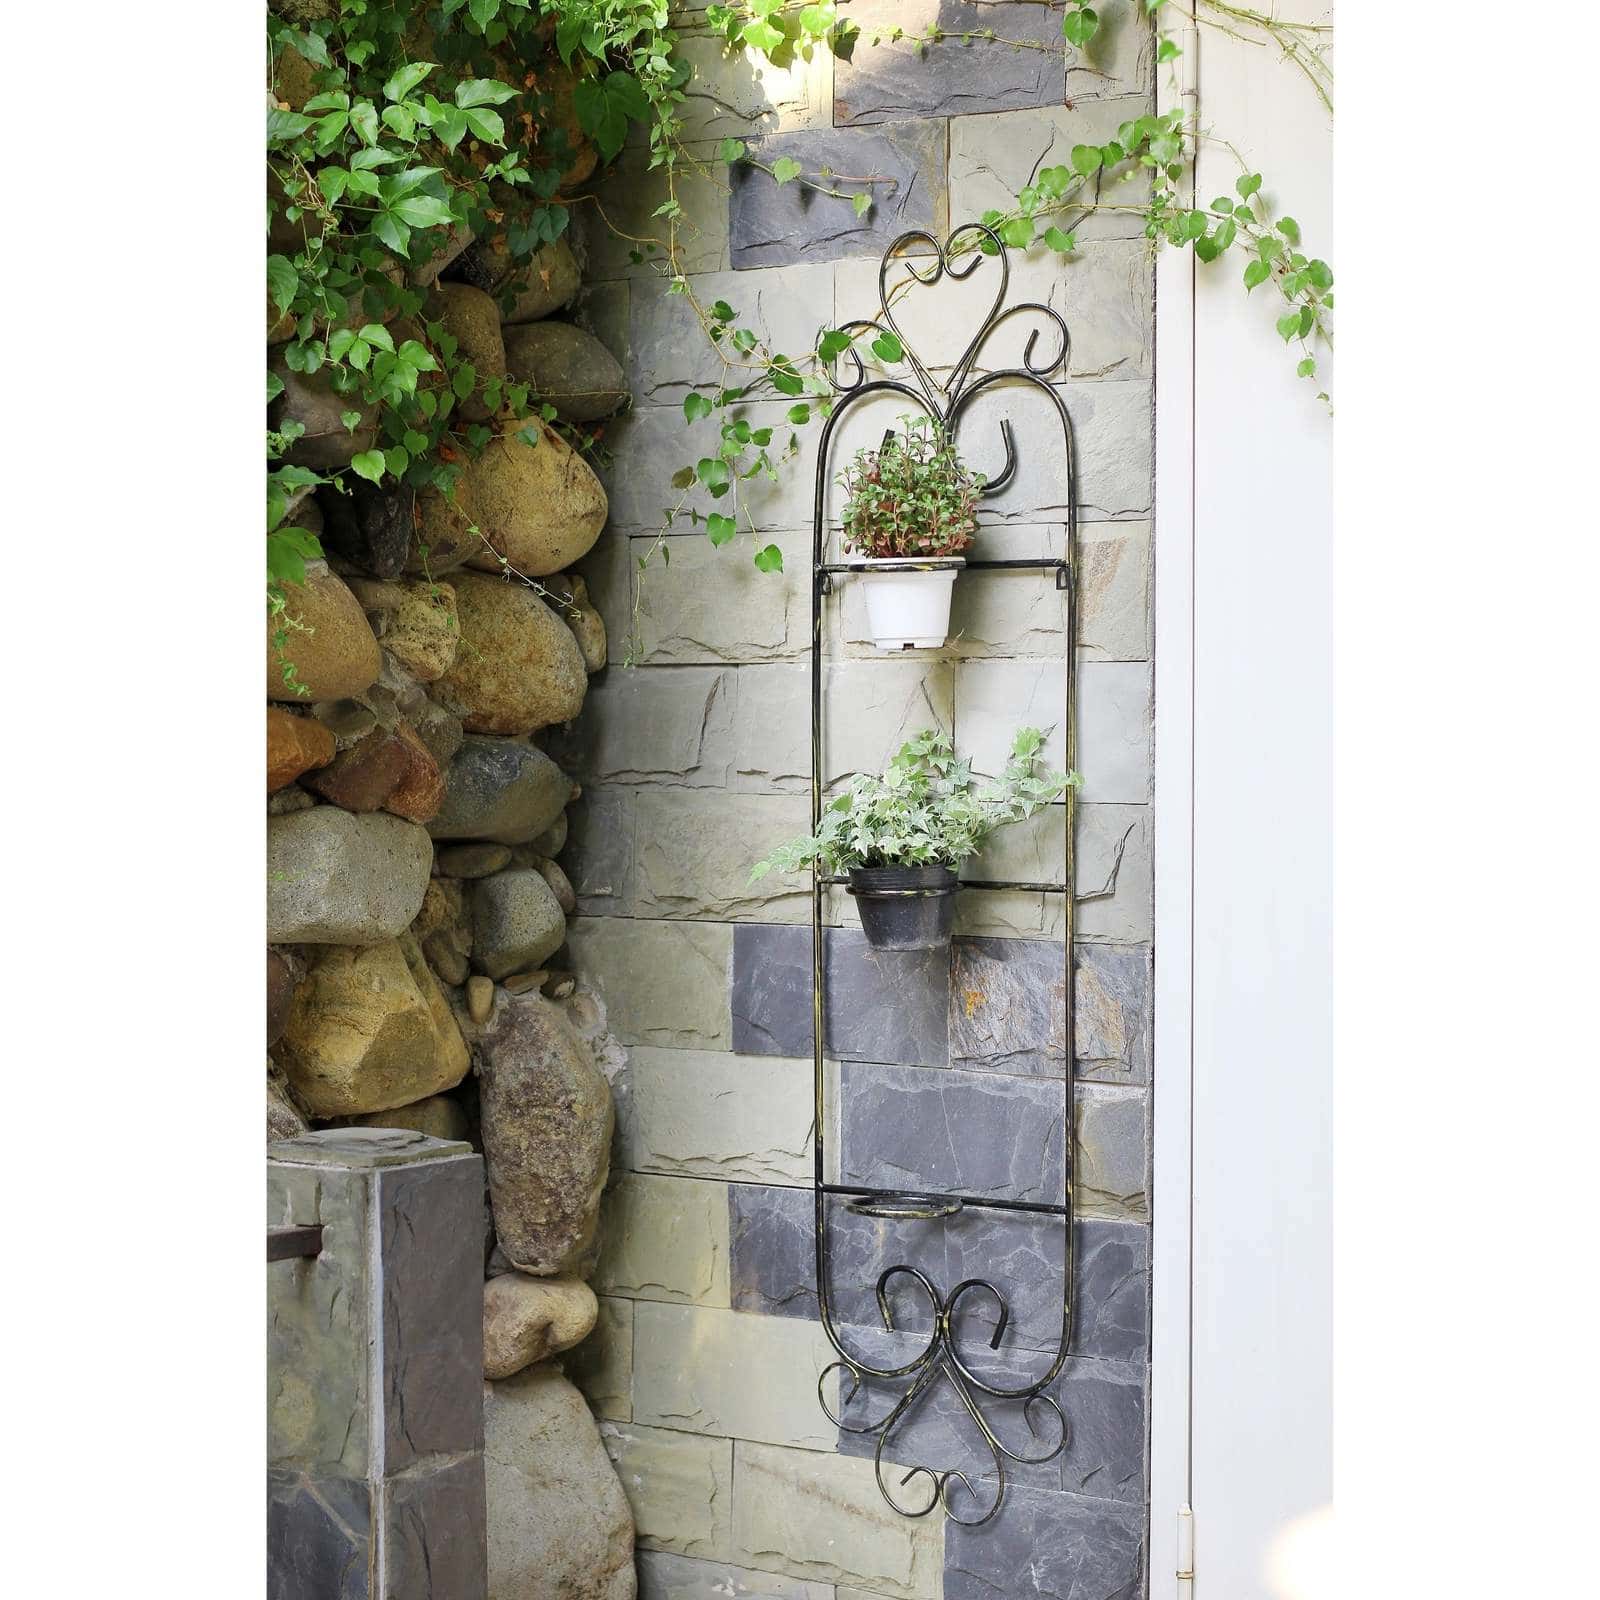 Get a Rustic Look with this Cast Iron Wall Planter